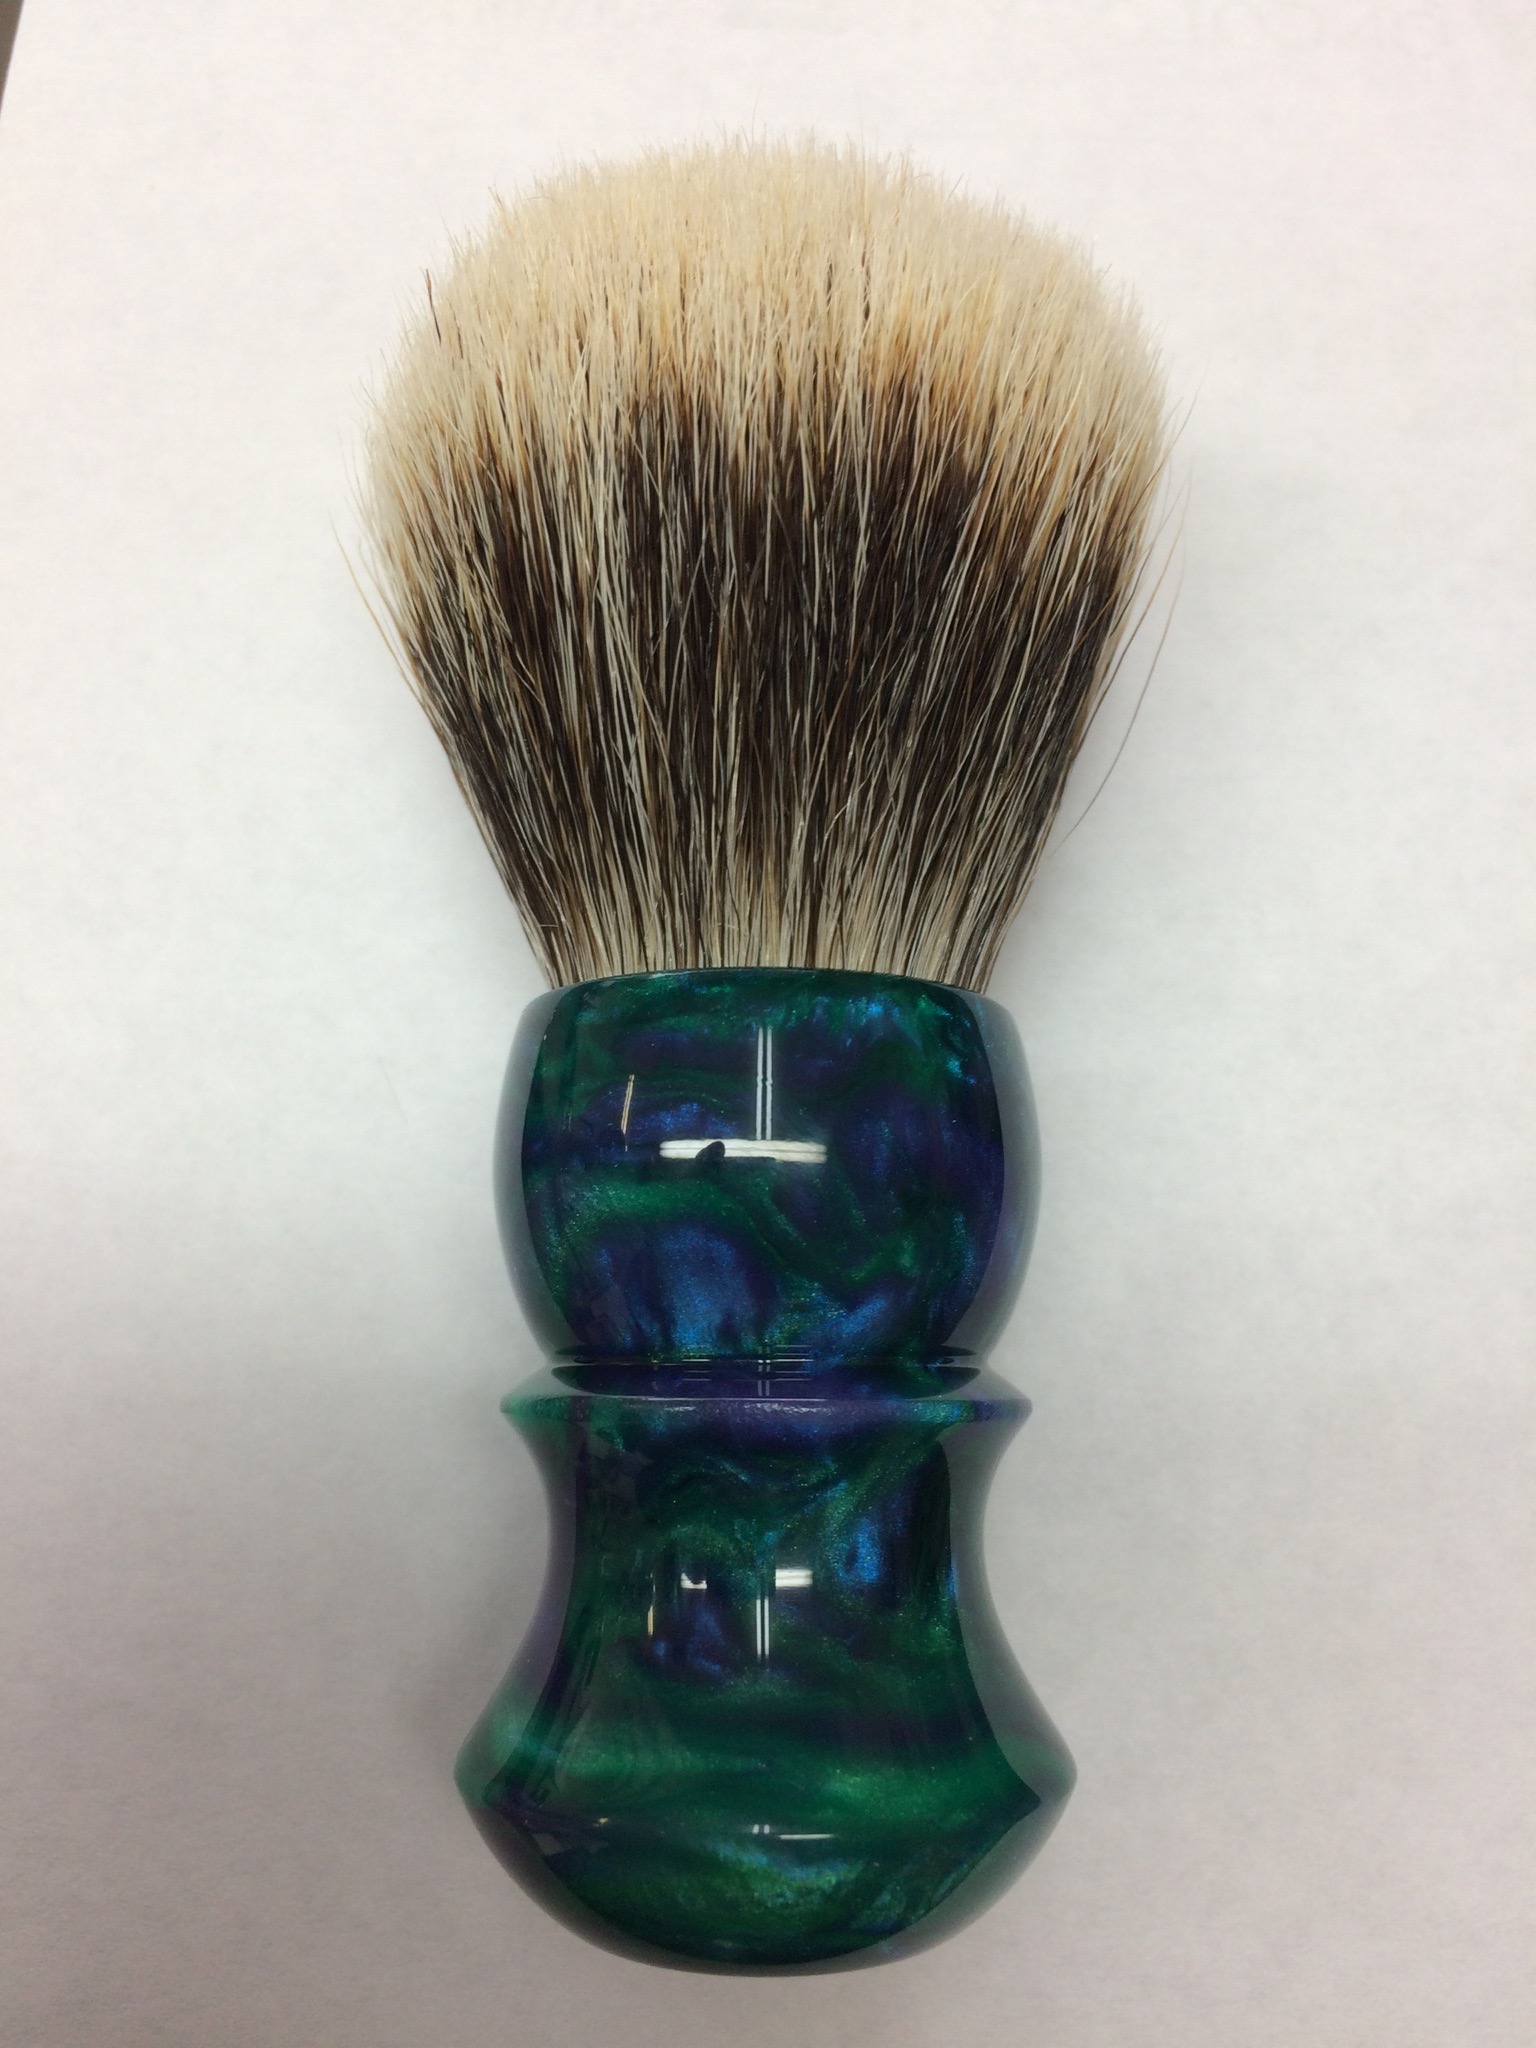 Another brush